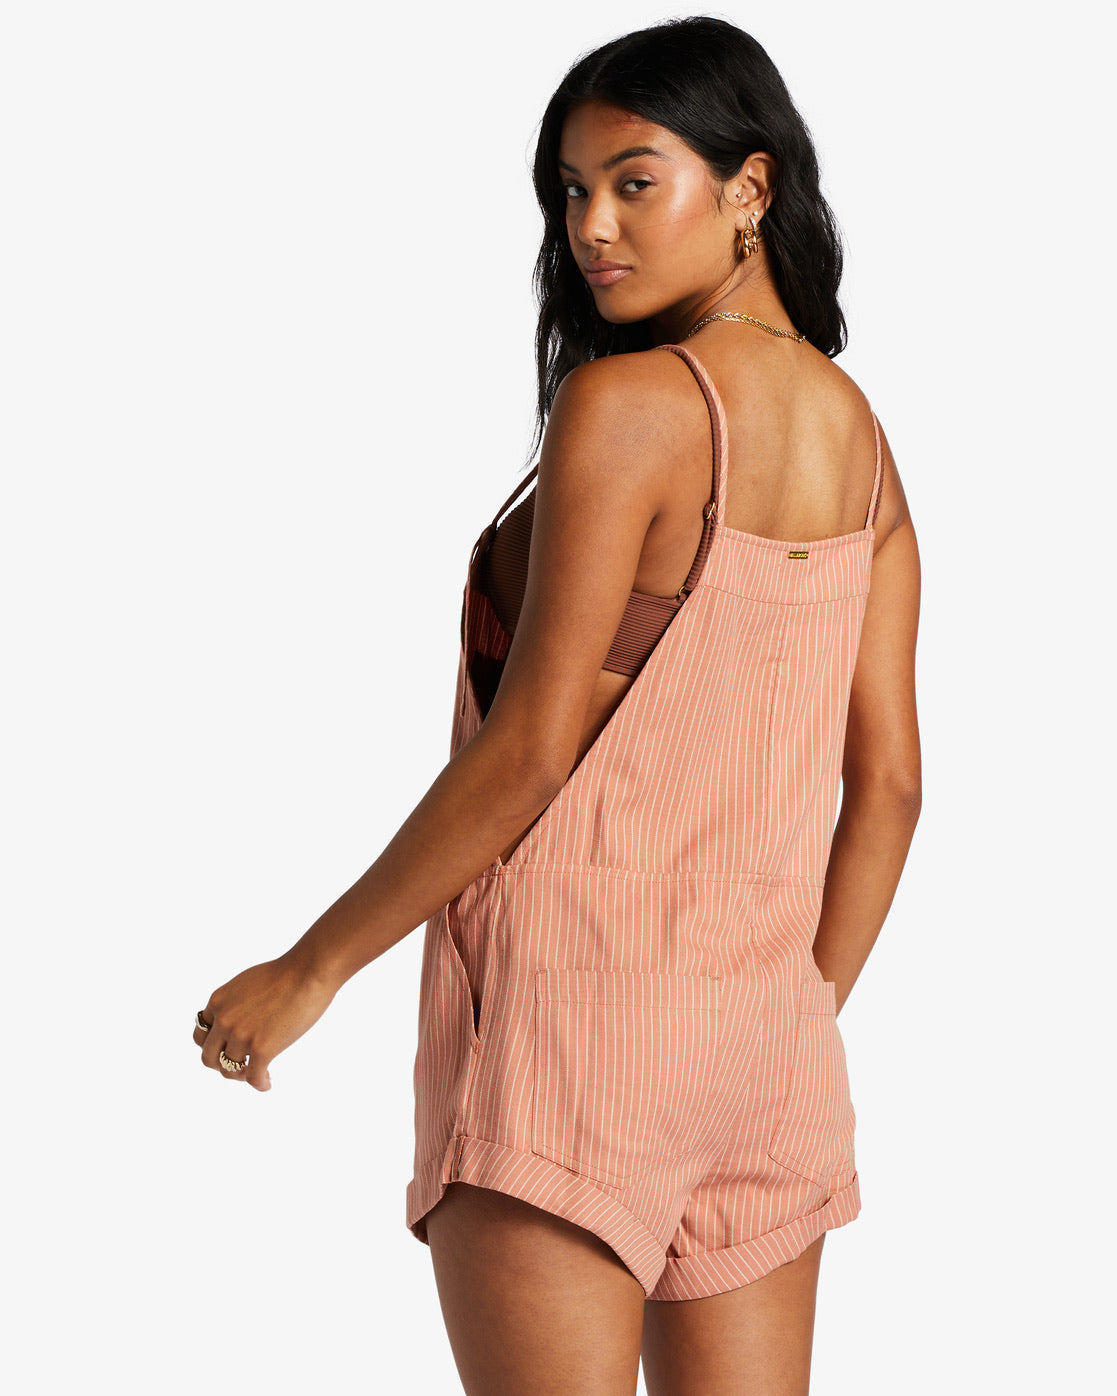 WILD PURSUIT OVERALL ROMPER - PINK STRIPED